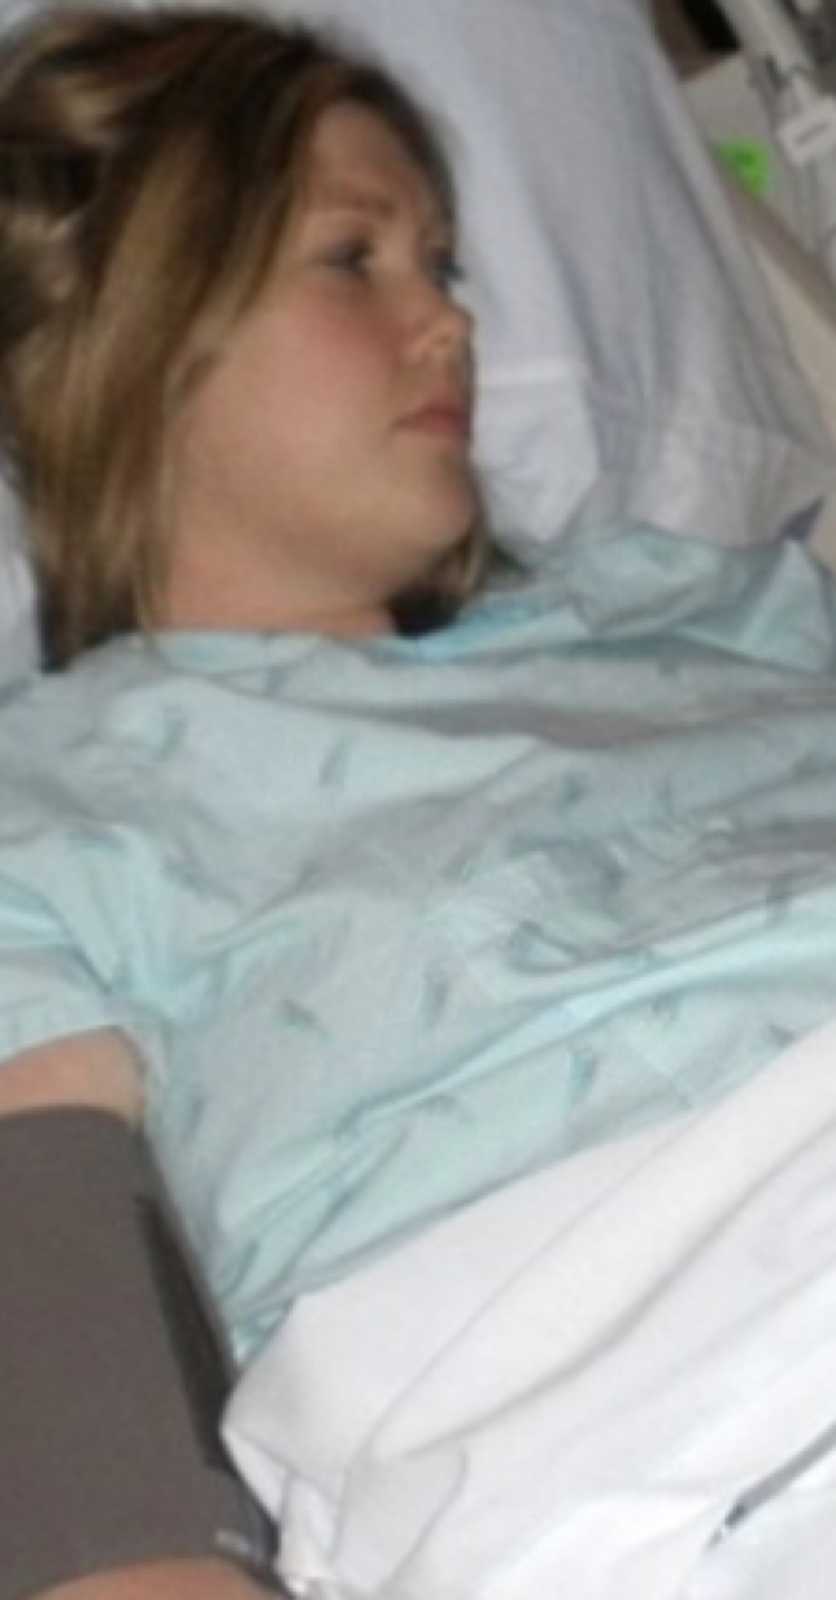 Woman who was a closet drunk lying in hospital bed after passing out